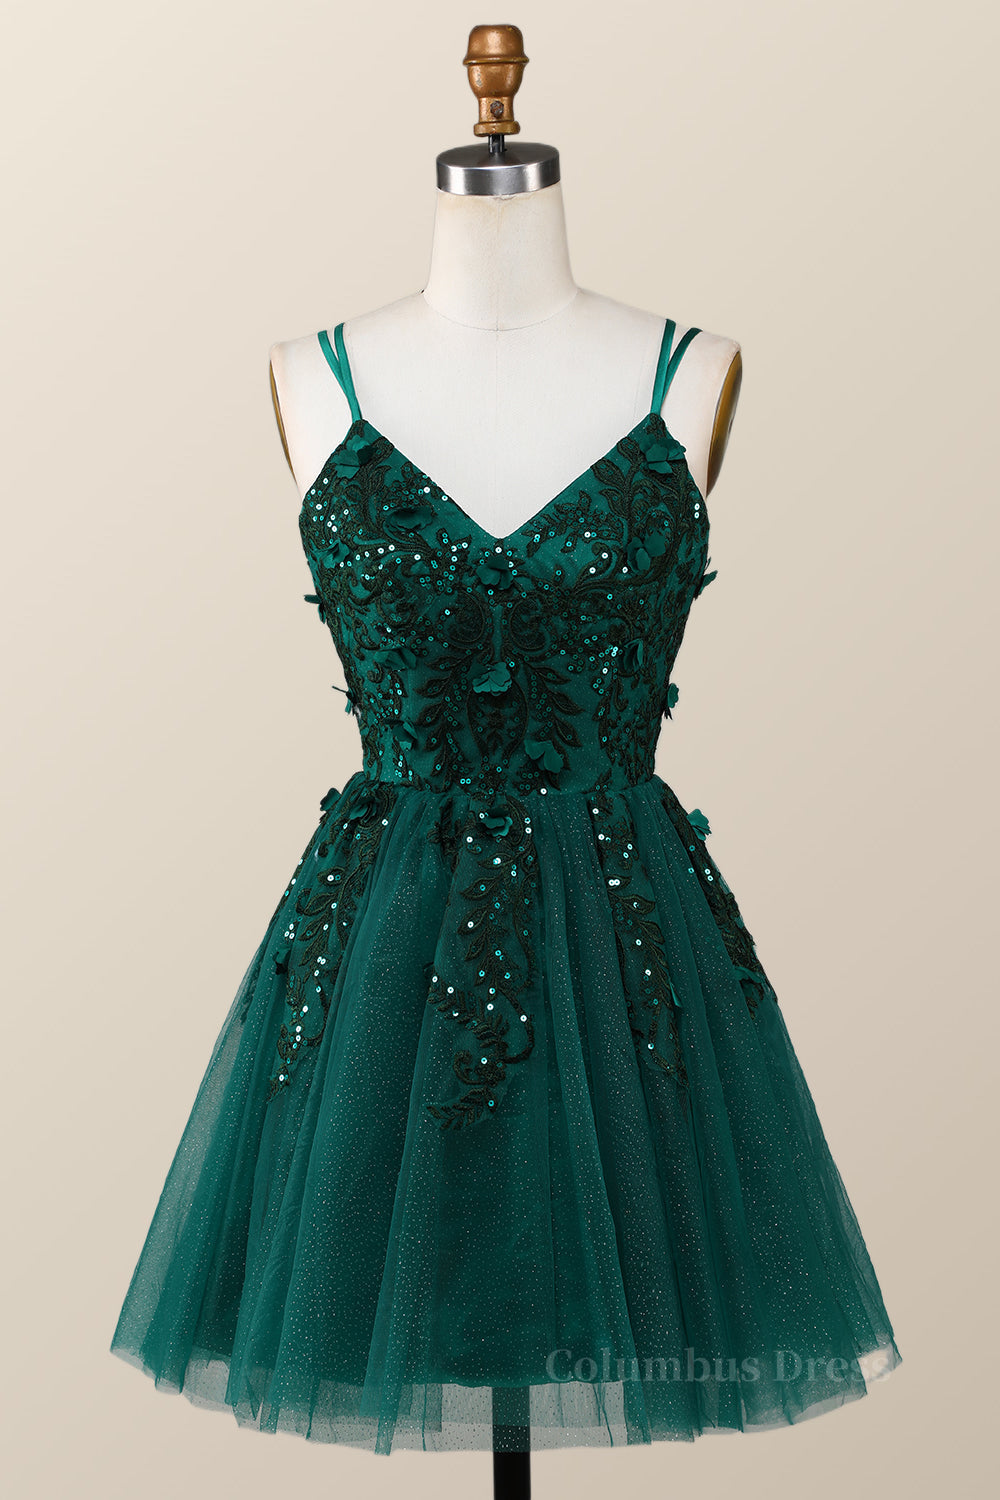 Dark Green Embroidered A-line Short Corset Homecoming Dress outfit, Functional Dress